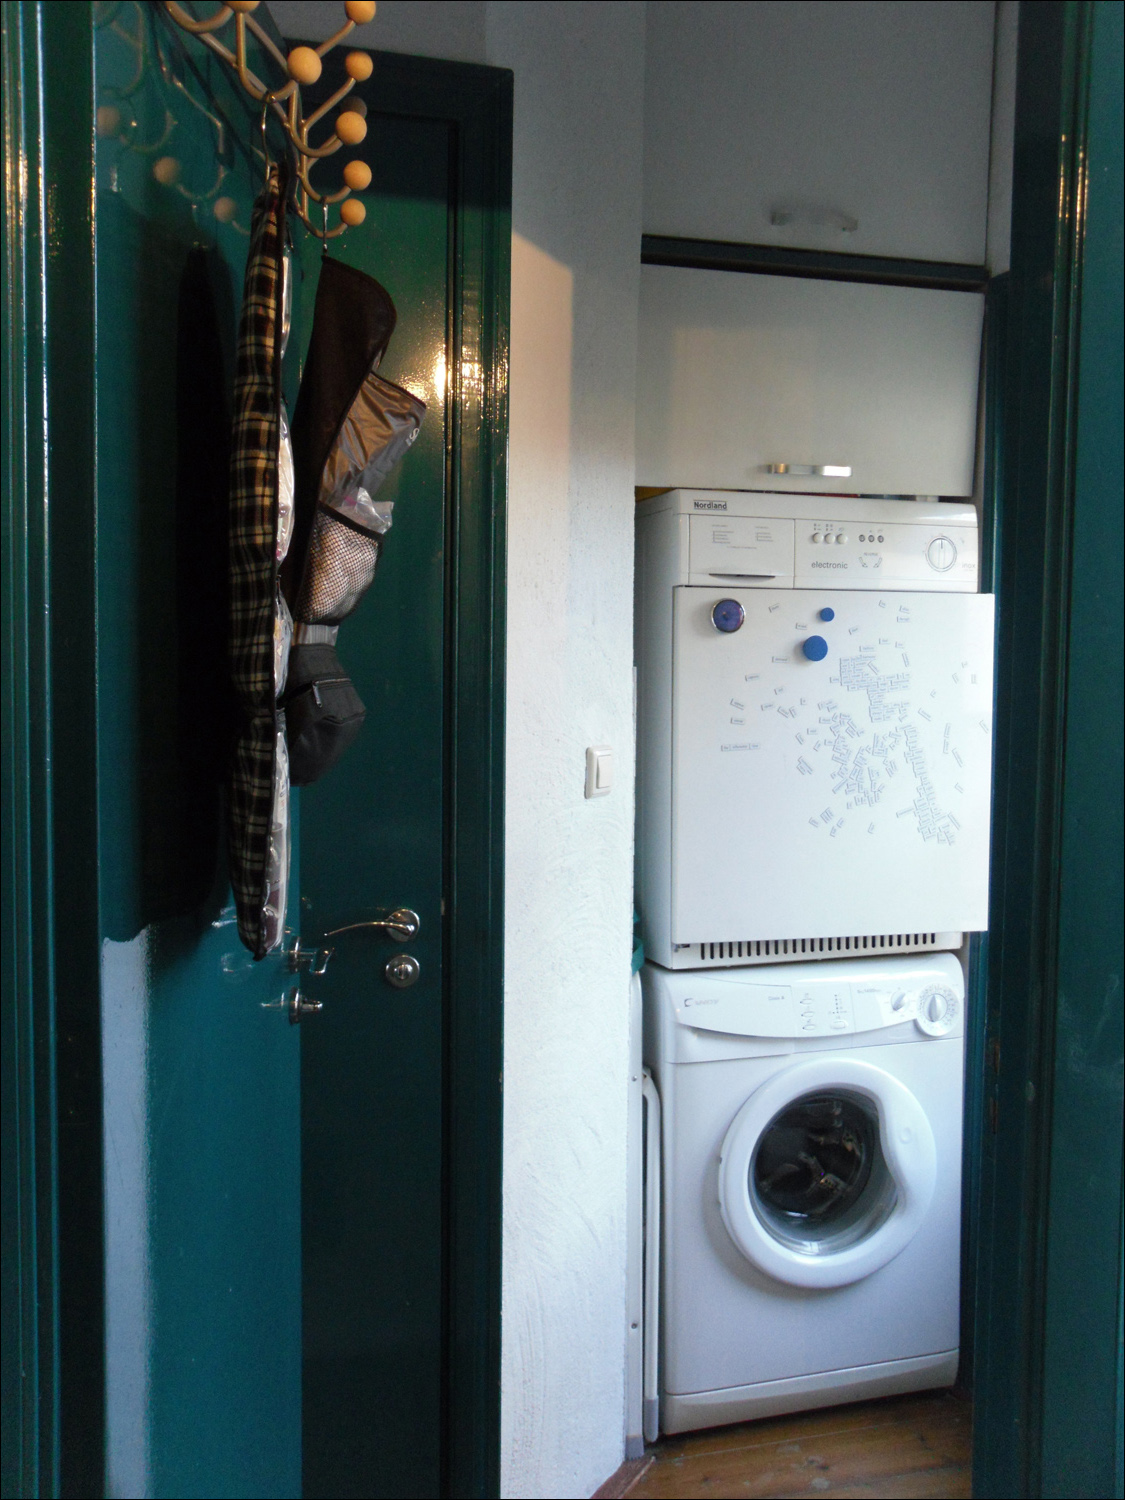 Laundry facilities in Delft house